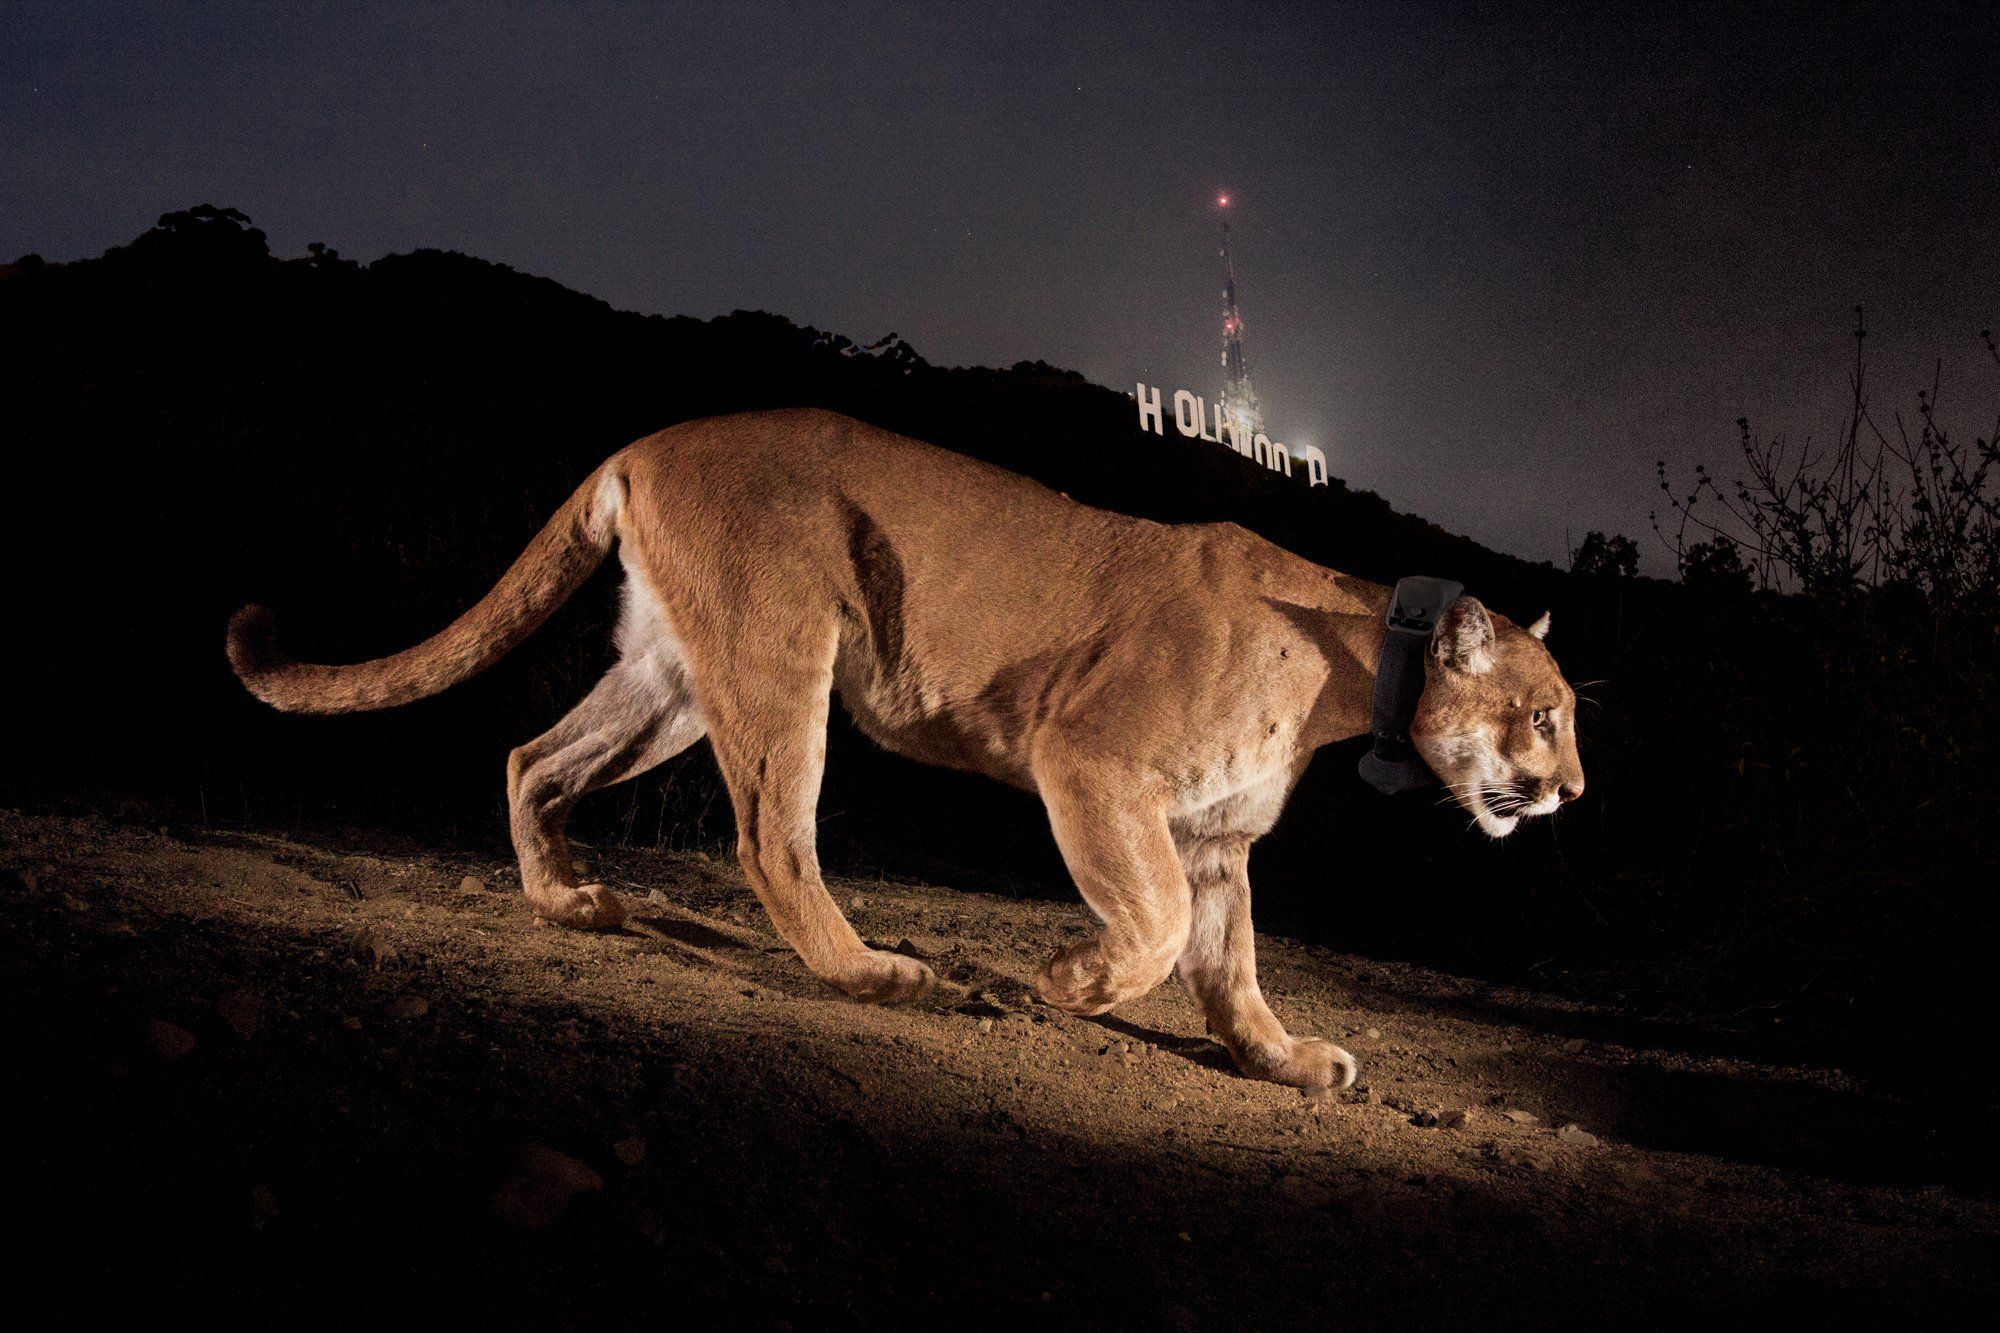 A cougar wearing a collar with the Hollywood sign in the background